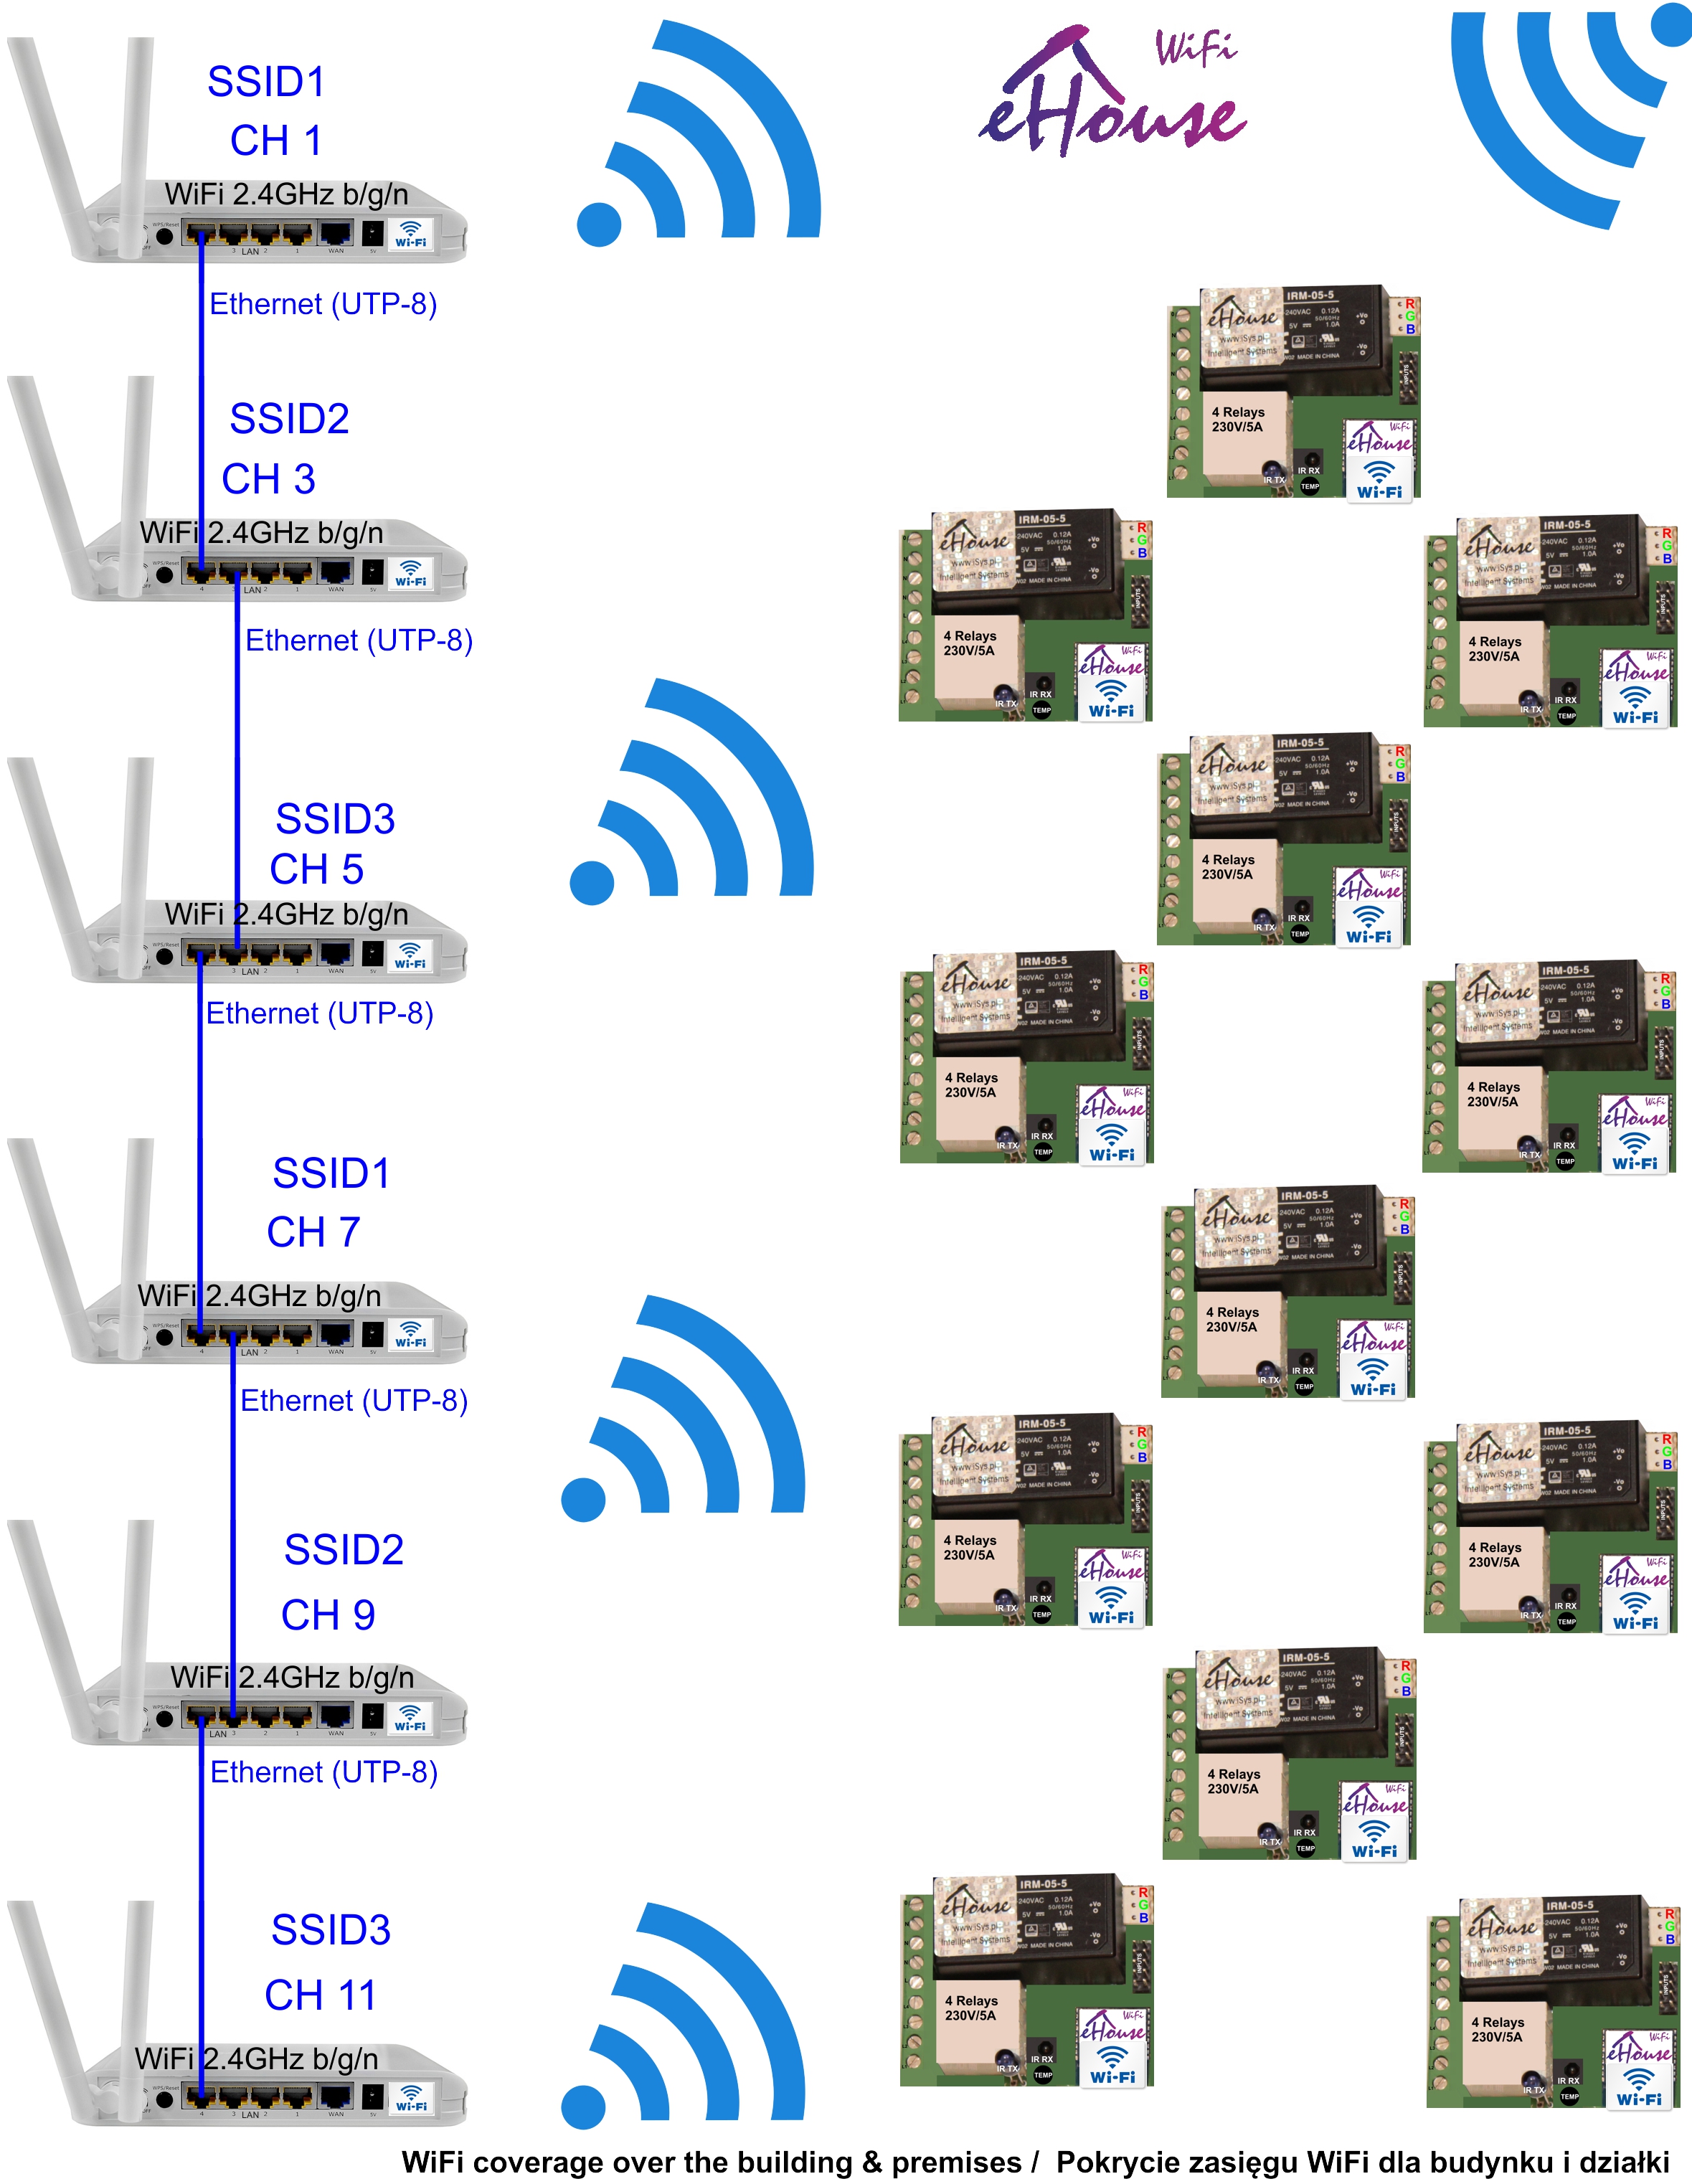 eHouse LAN/WiFi smart home- schematic of infrastructure Wifi/Ethernet